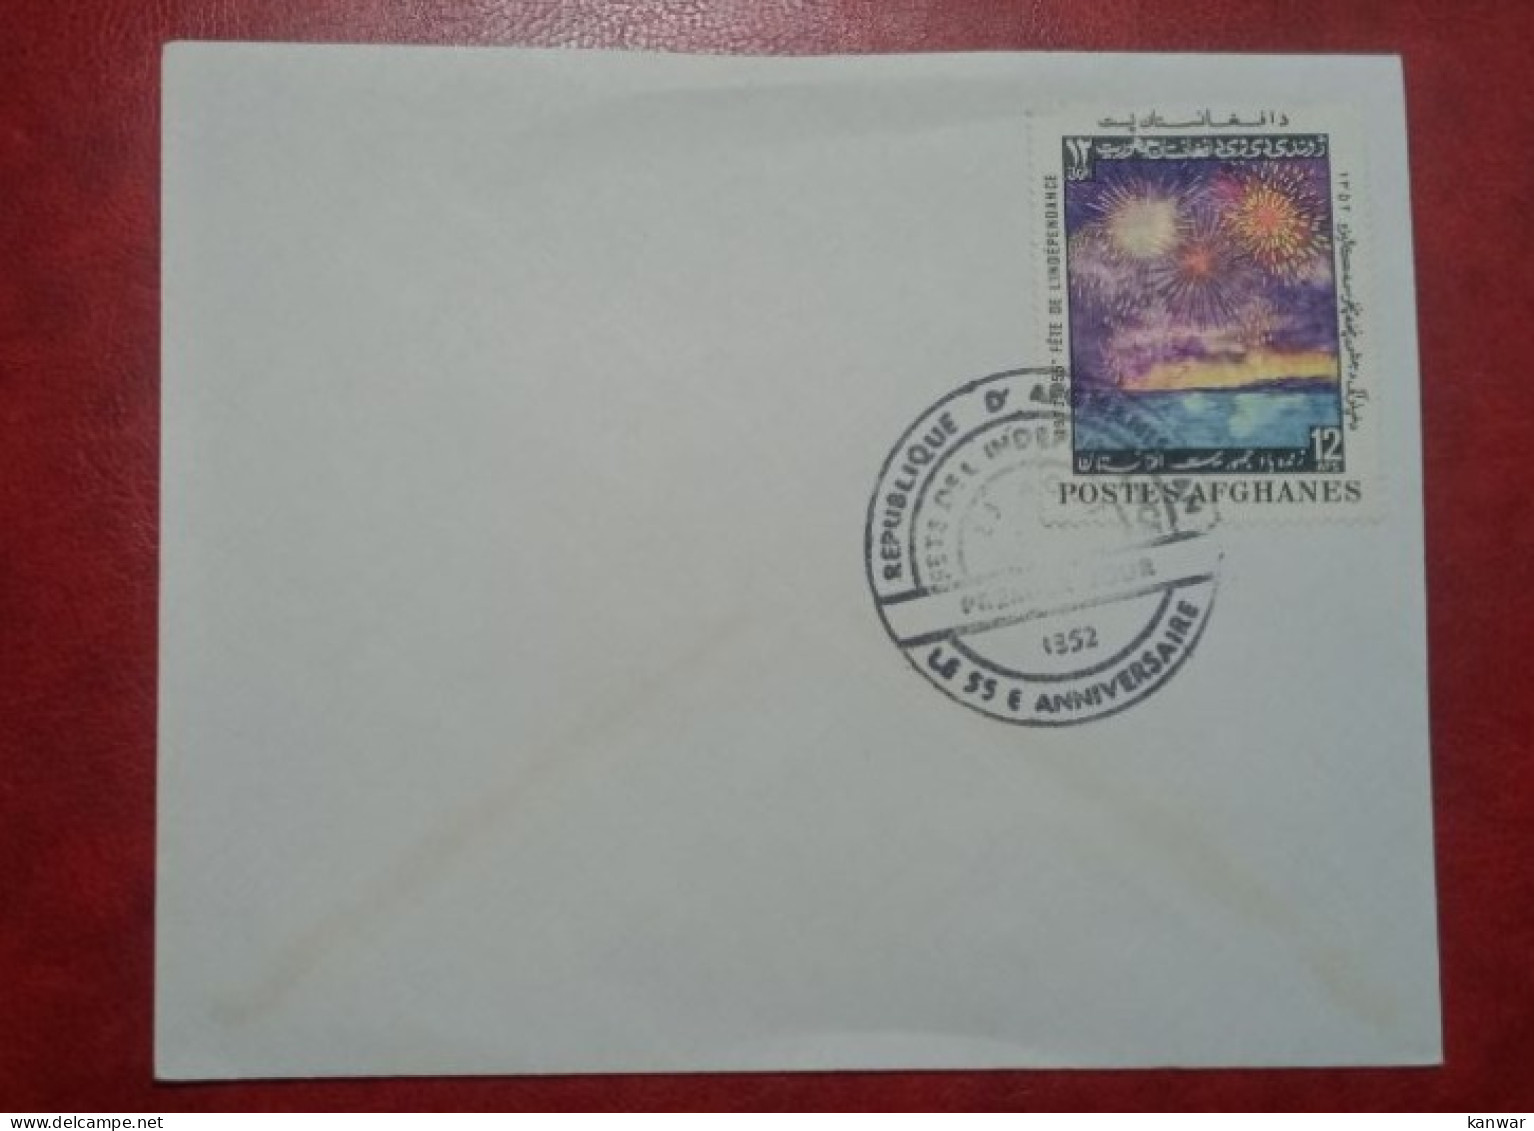 AFGHANSTAN FDC COVER WITH STAMP DEMOCRACY IN AFGHANISTAN - Afghanistan